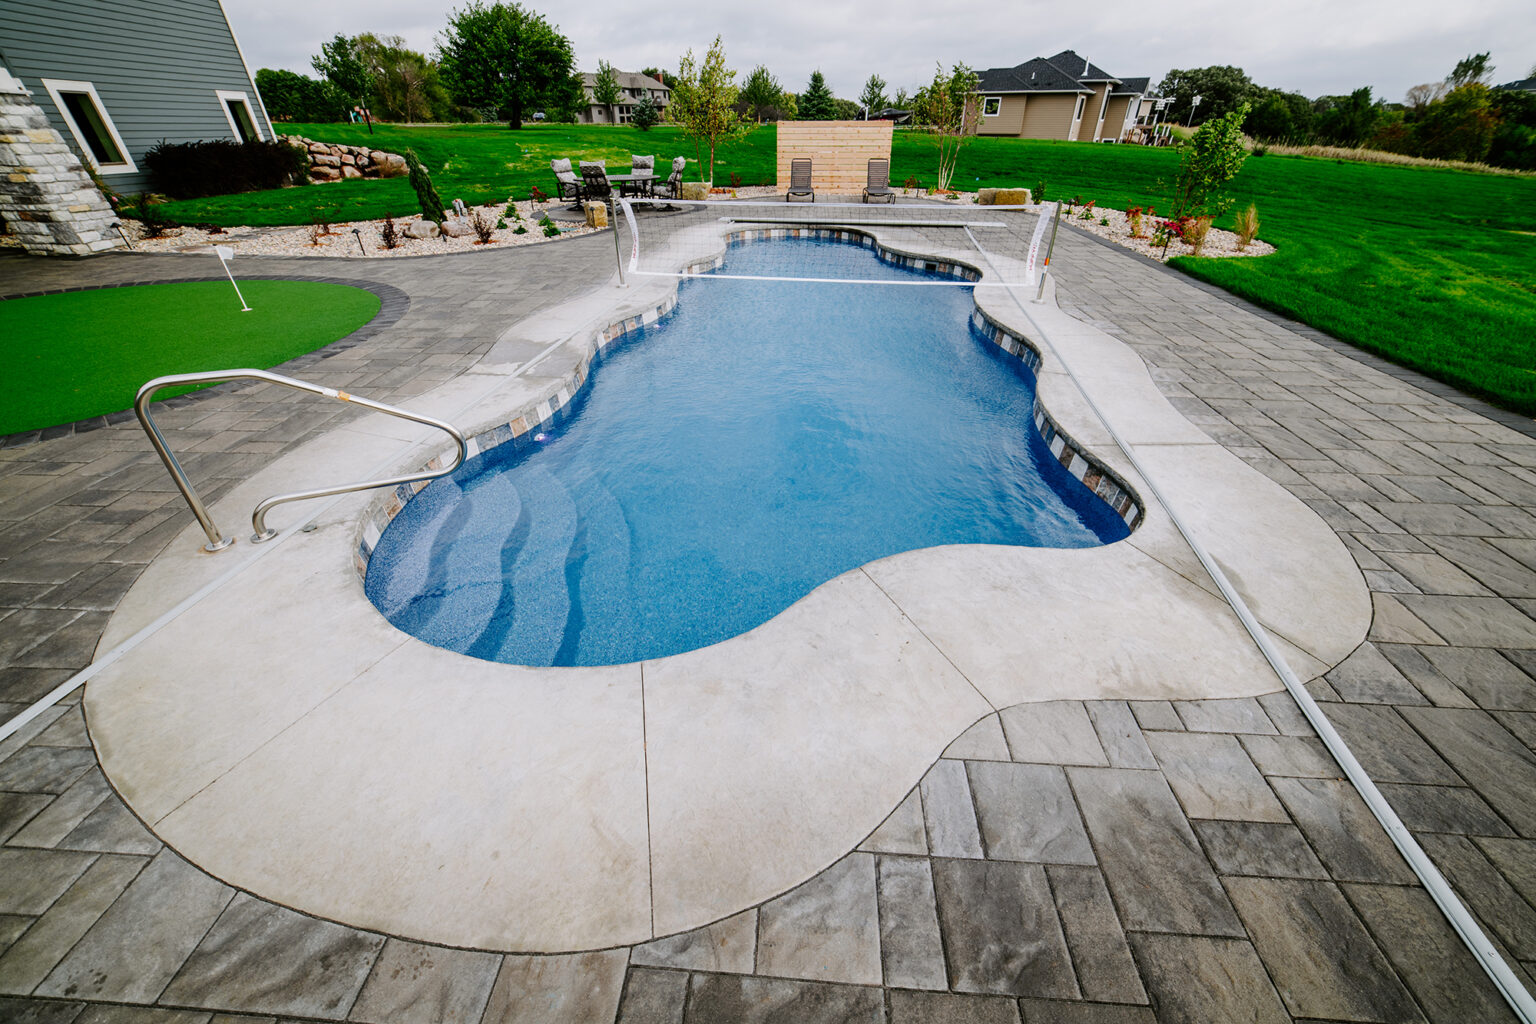 Sioux Falls pool landscaping project